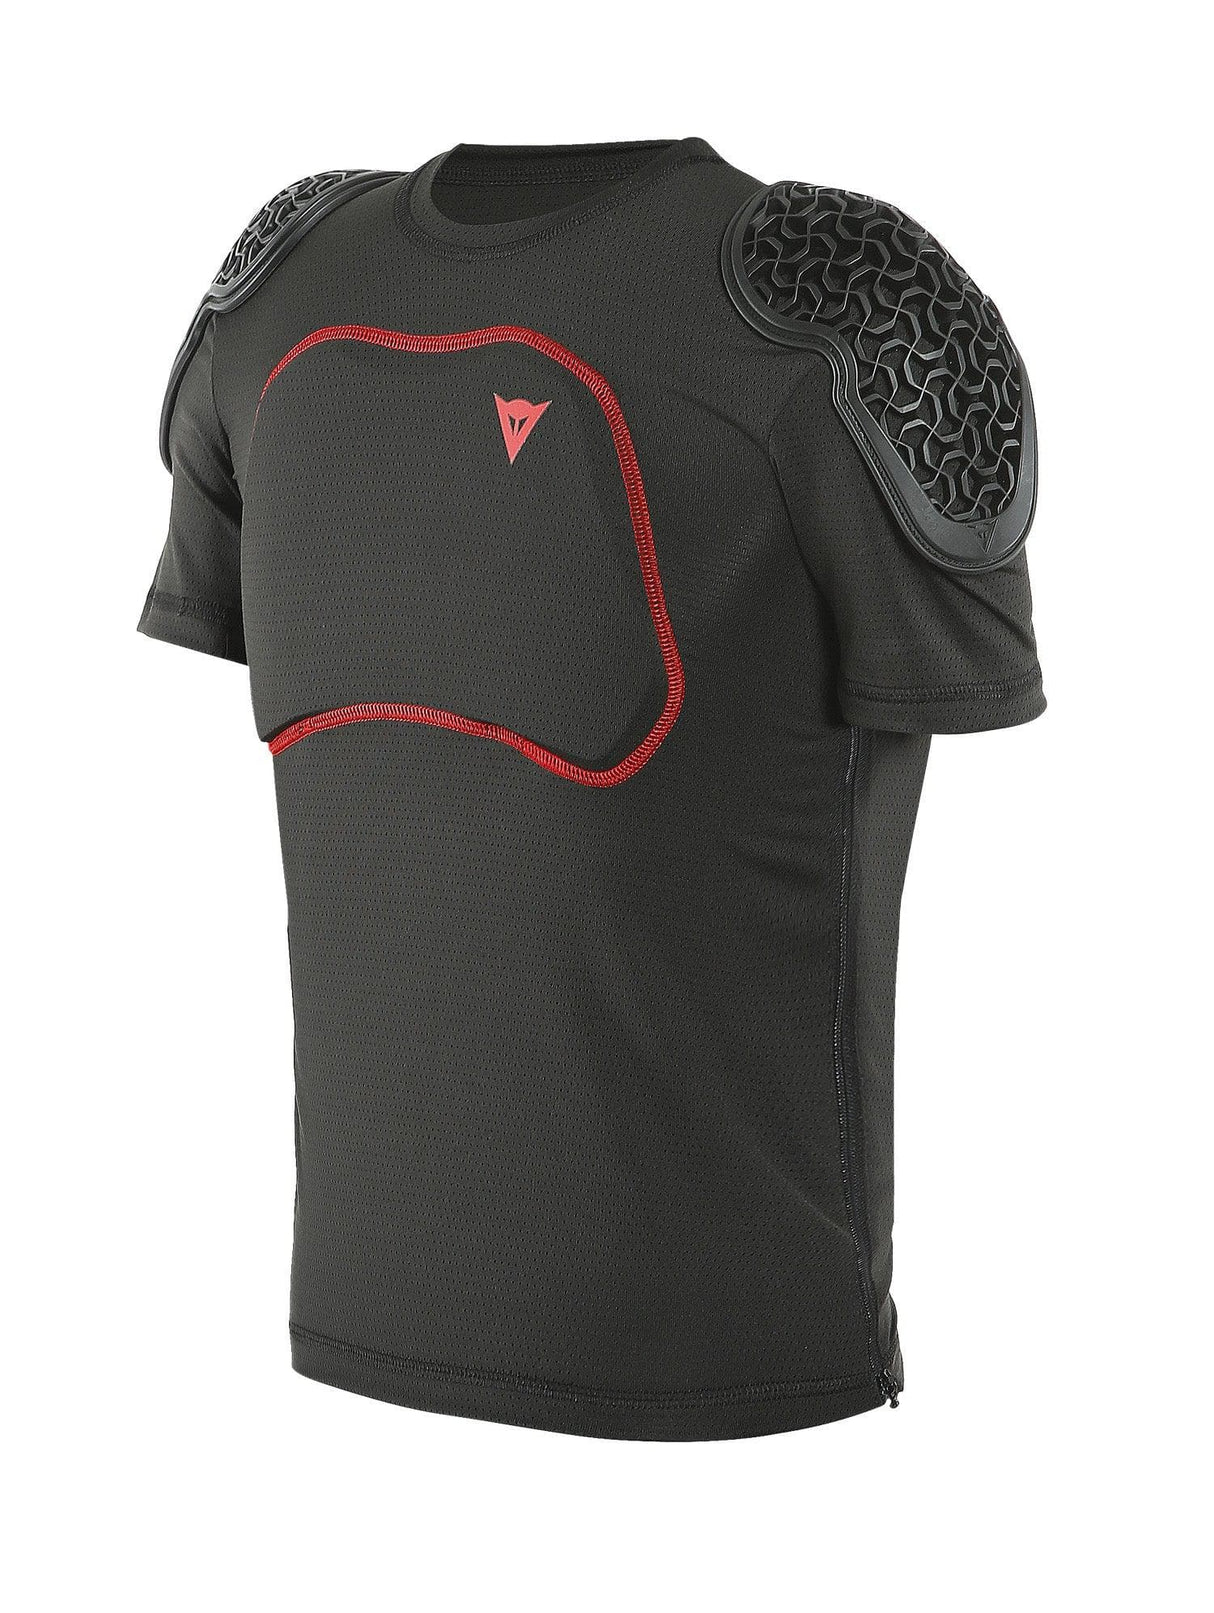 Dainese Scarabeo Pro Juniour Safety Tee (Black, L)